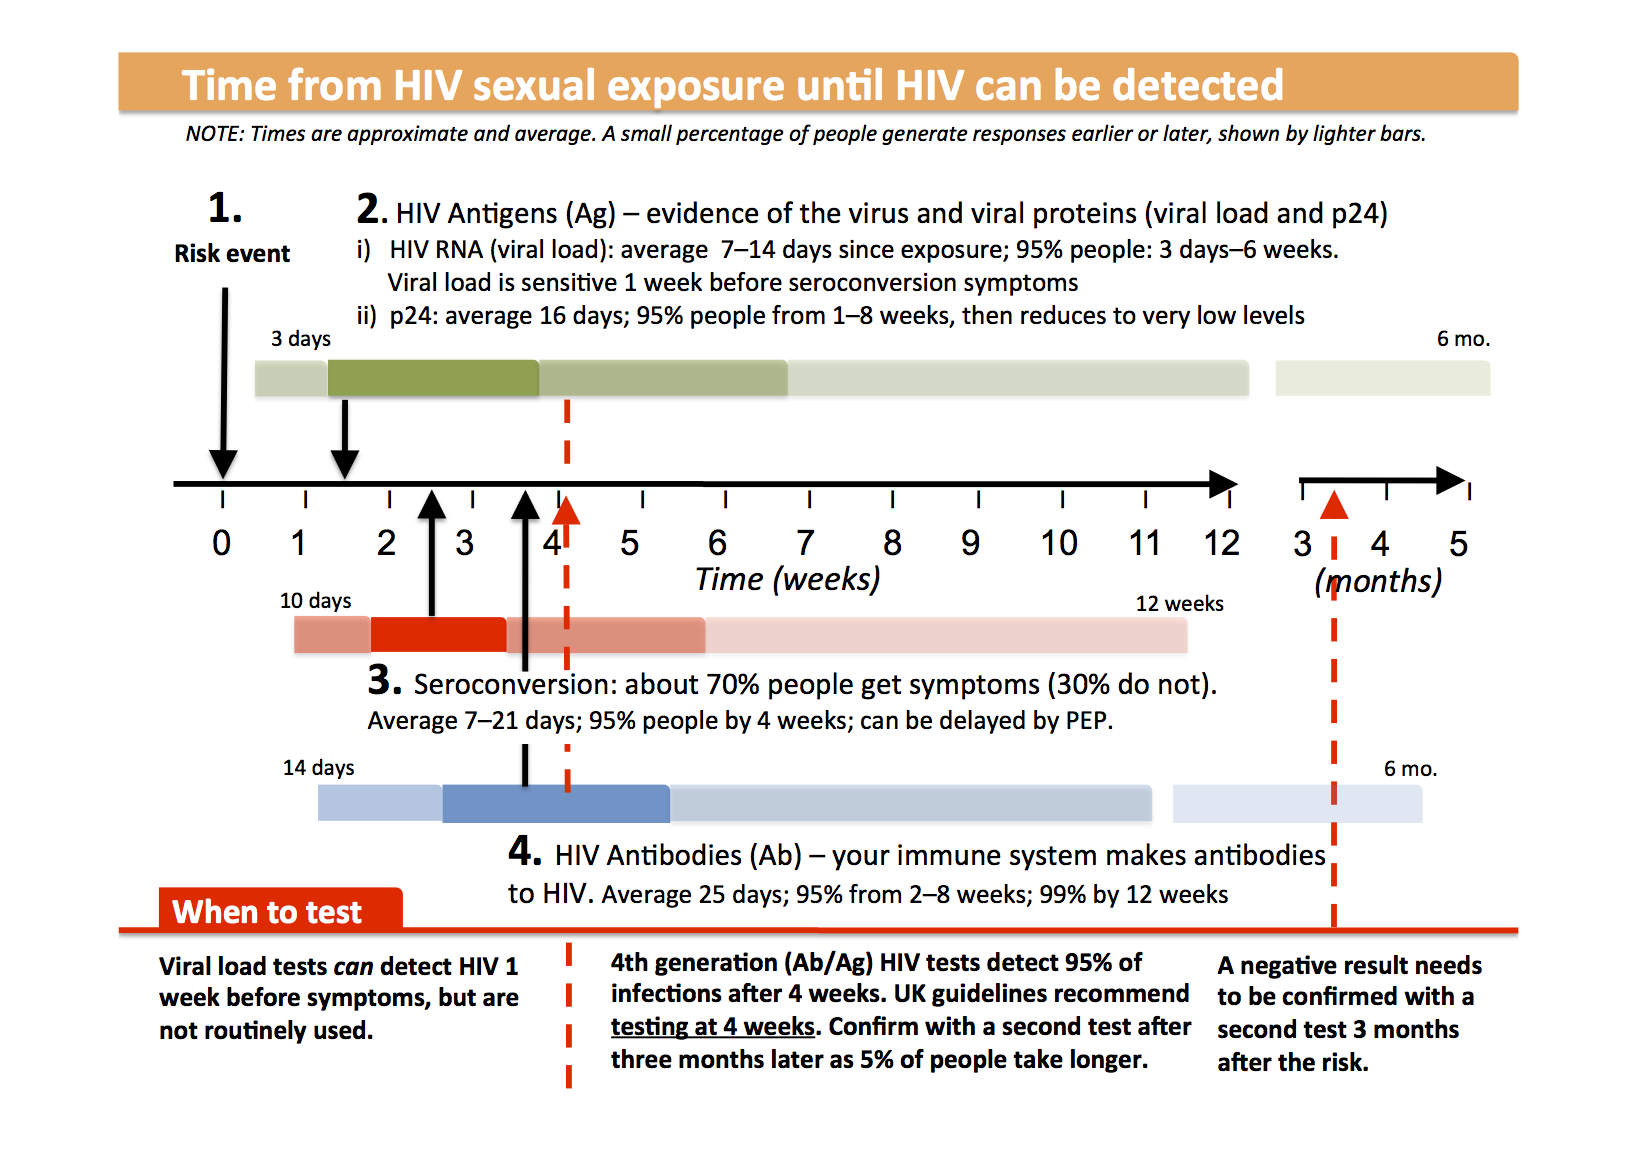 Tables, diagrams and illustrations | Guides | HIV i-Base